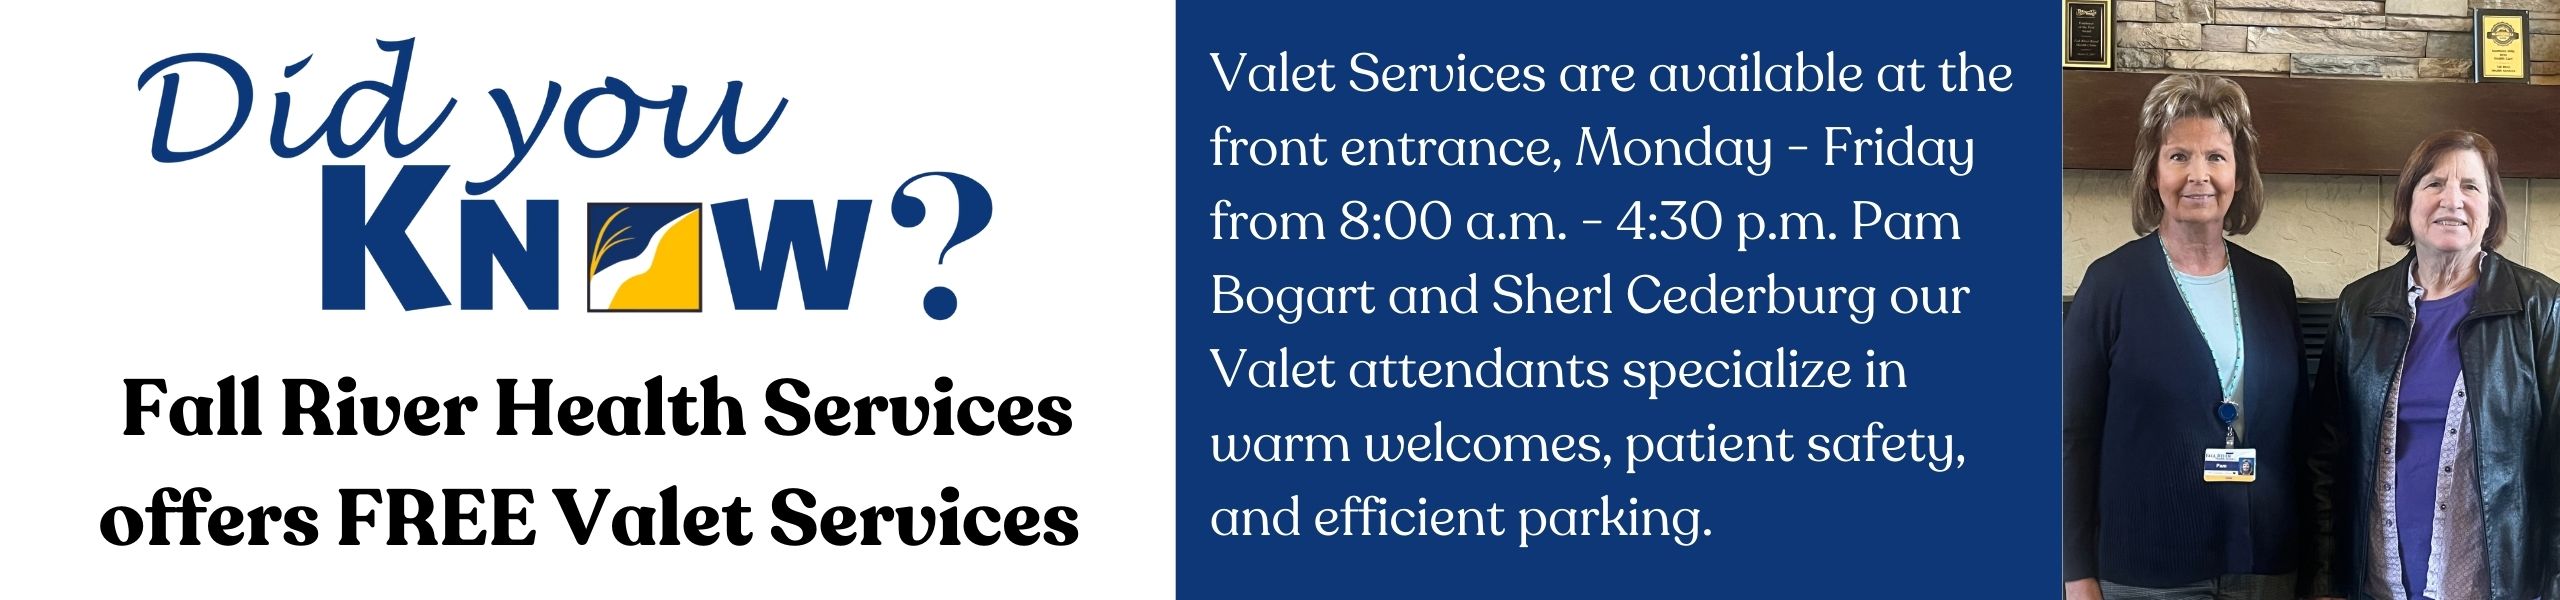 Did You Know Valet Services